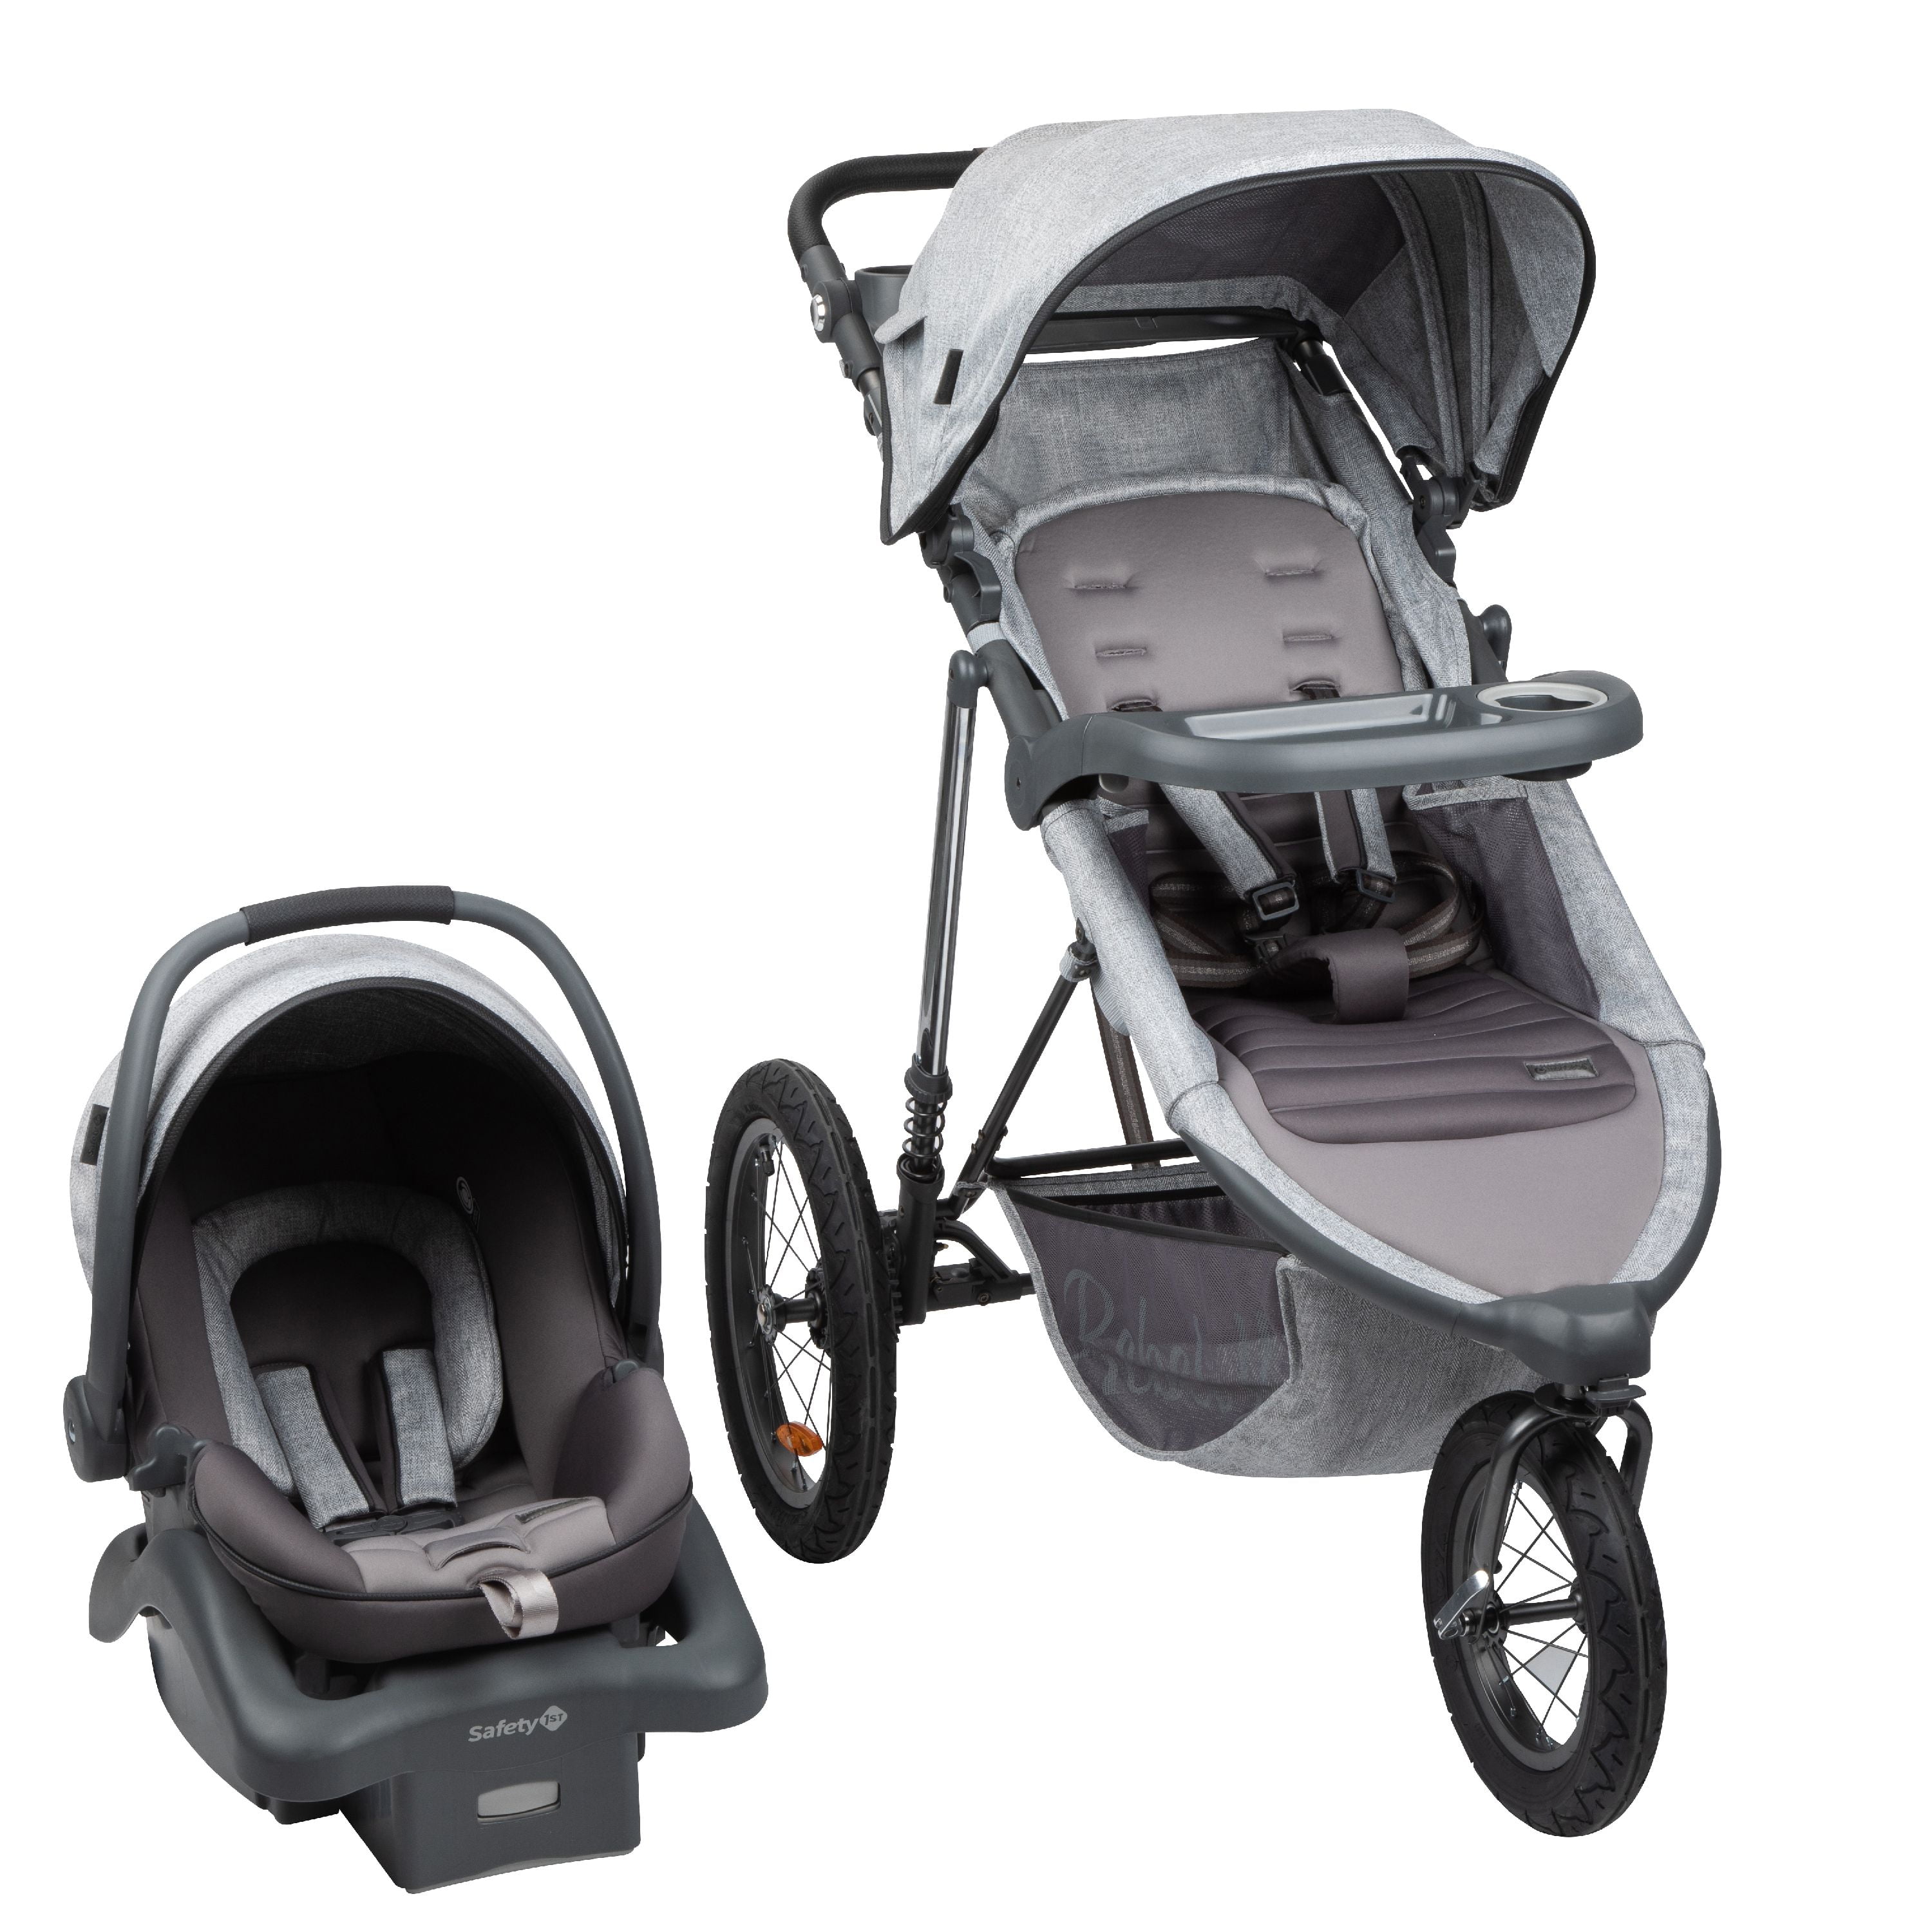 Baby Travel System Infant Stroller And Safety Car Seat Combo Gray Pinstripe NEW 